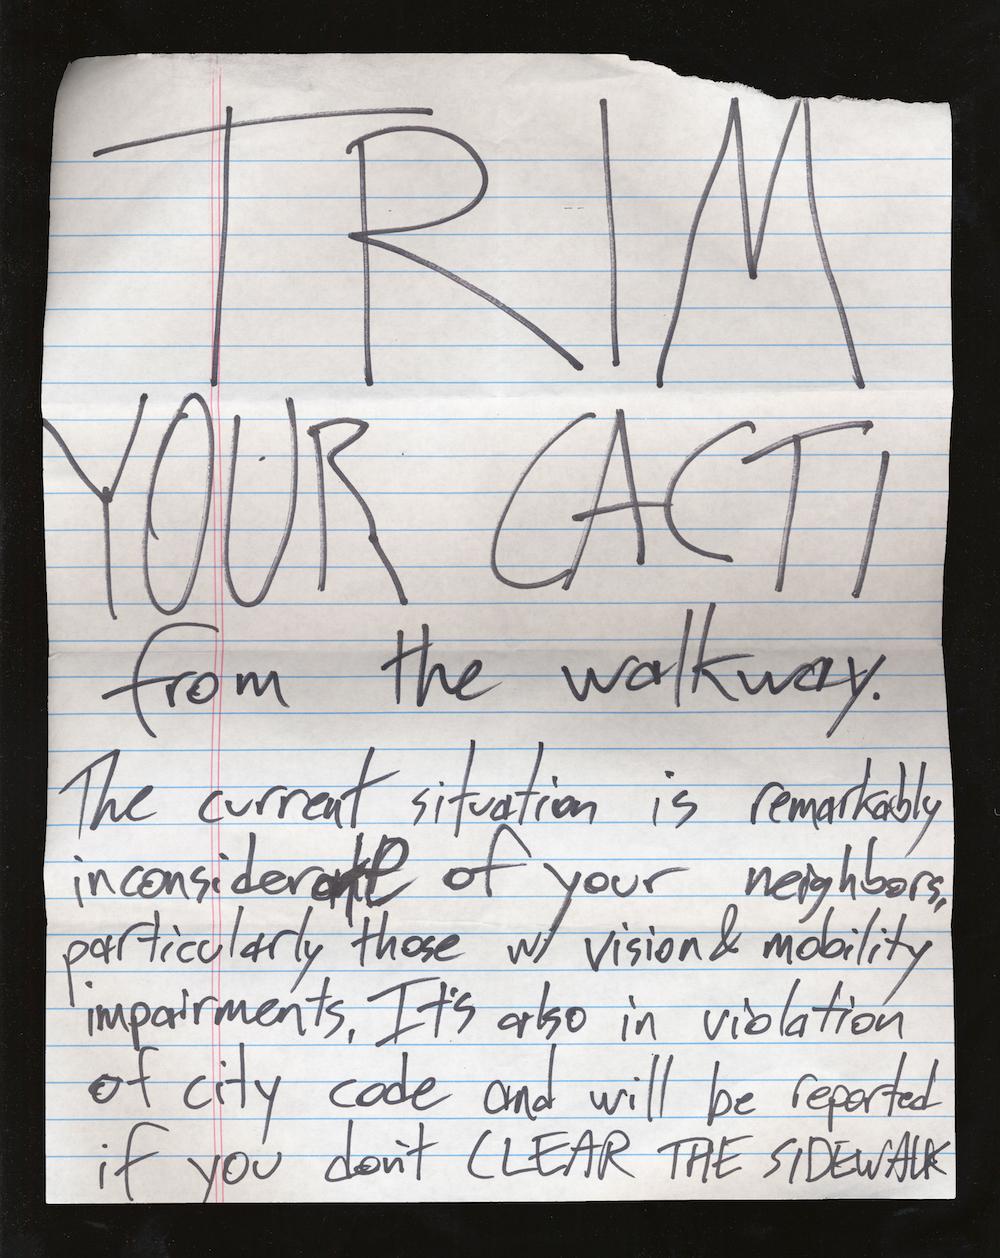  A note that reads TRIM YOUR CACTI from the walkway. The current situation is remarkably inconsiderate of your neighbors, particularly those with vision & mobility impairments. It’s also in violation of city code and will be reported."